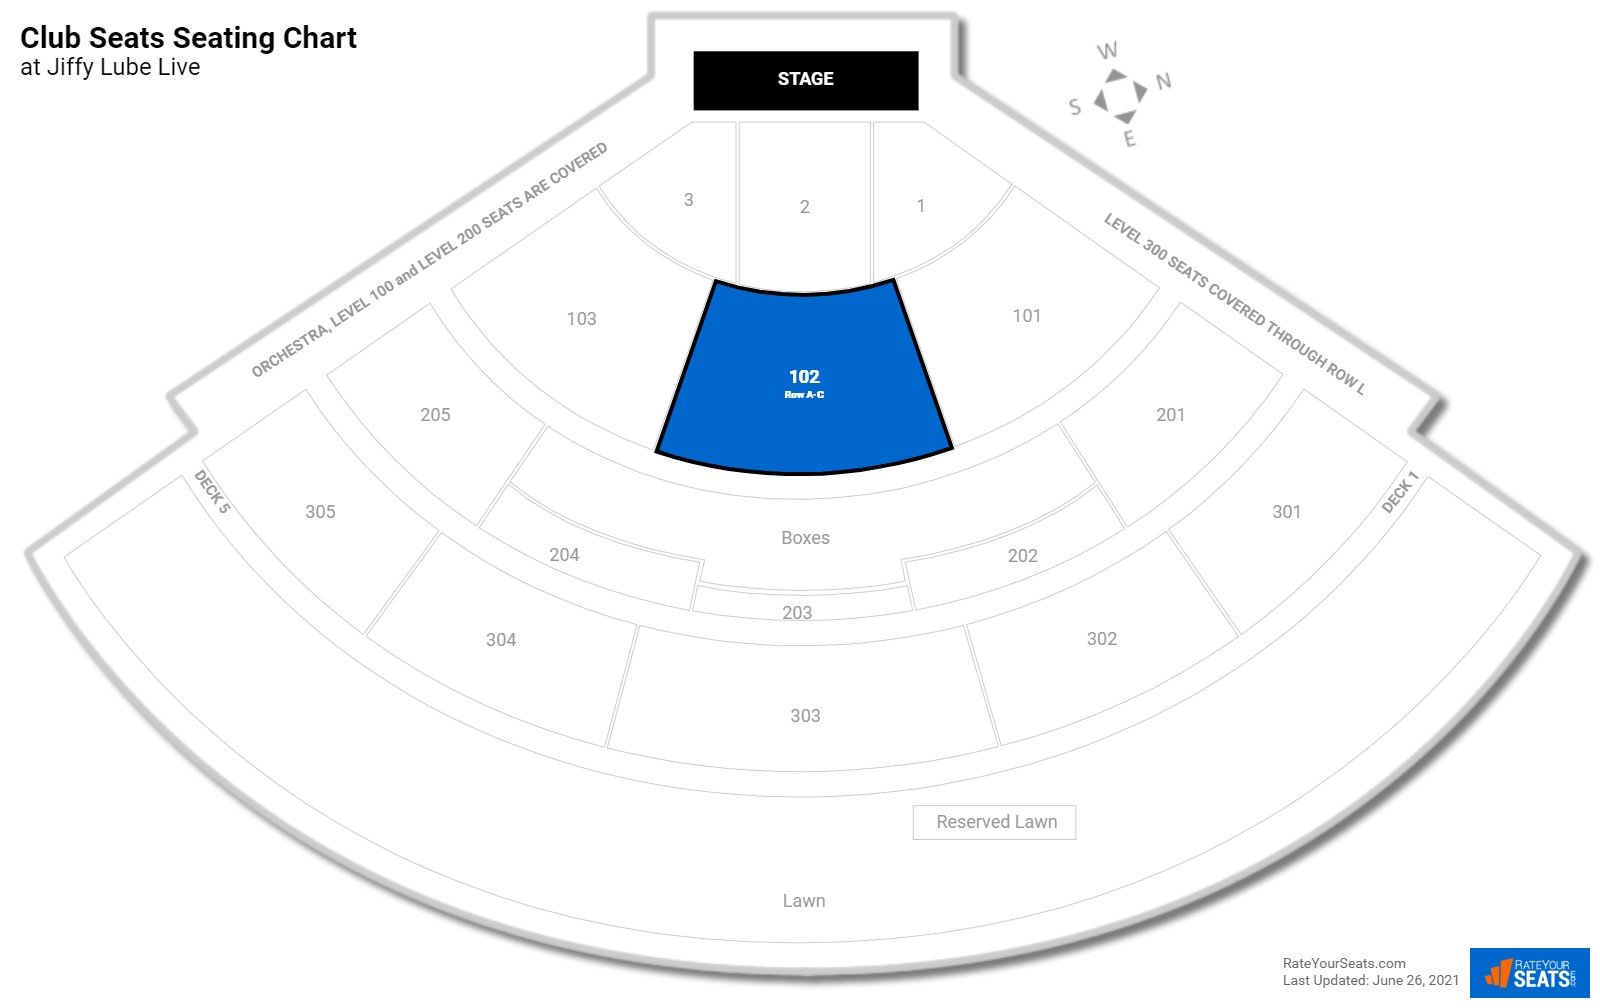 Concert Club Seats Seating Chart at Jiffy Lube Live